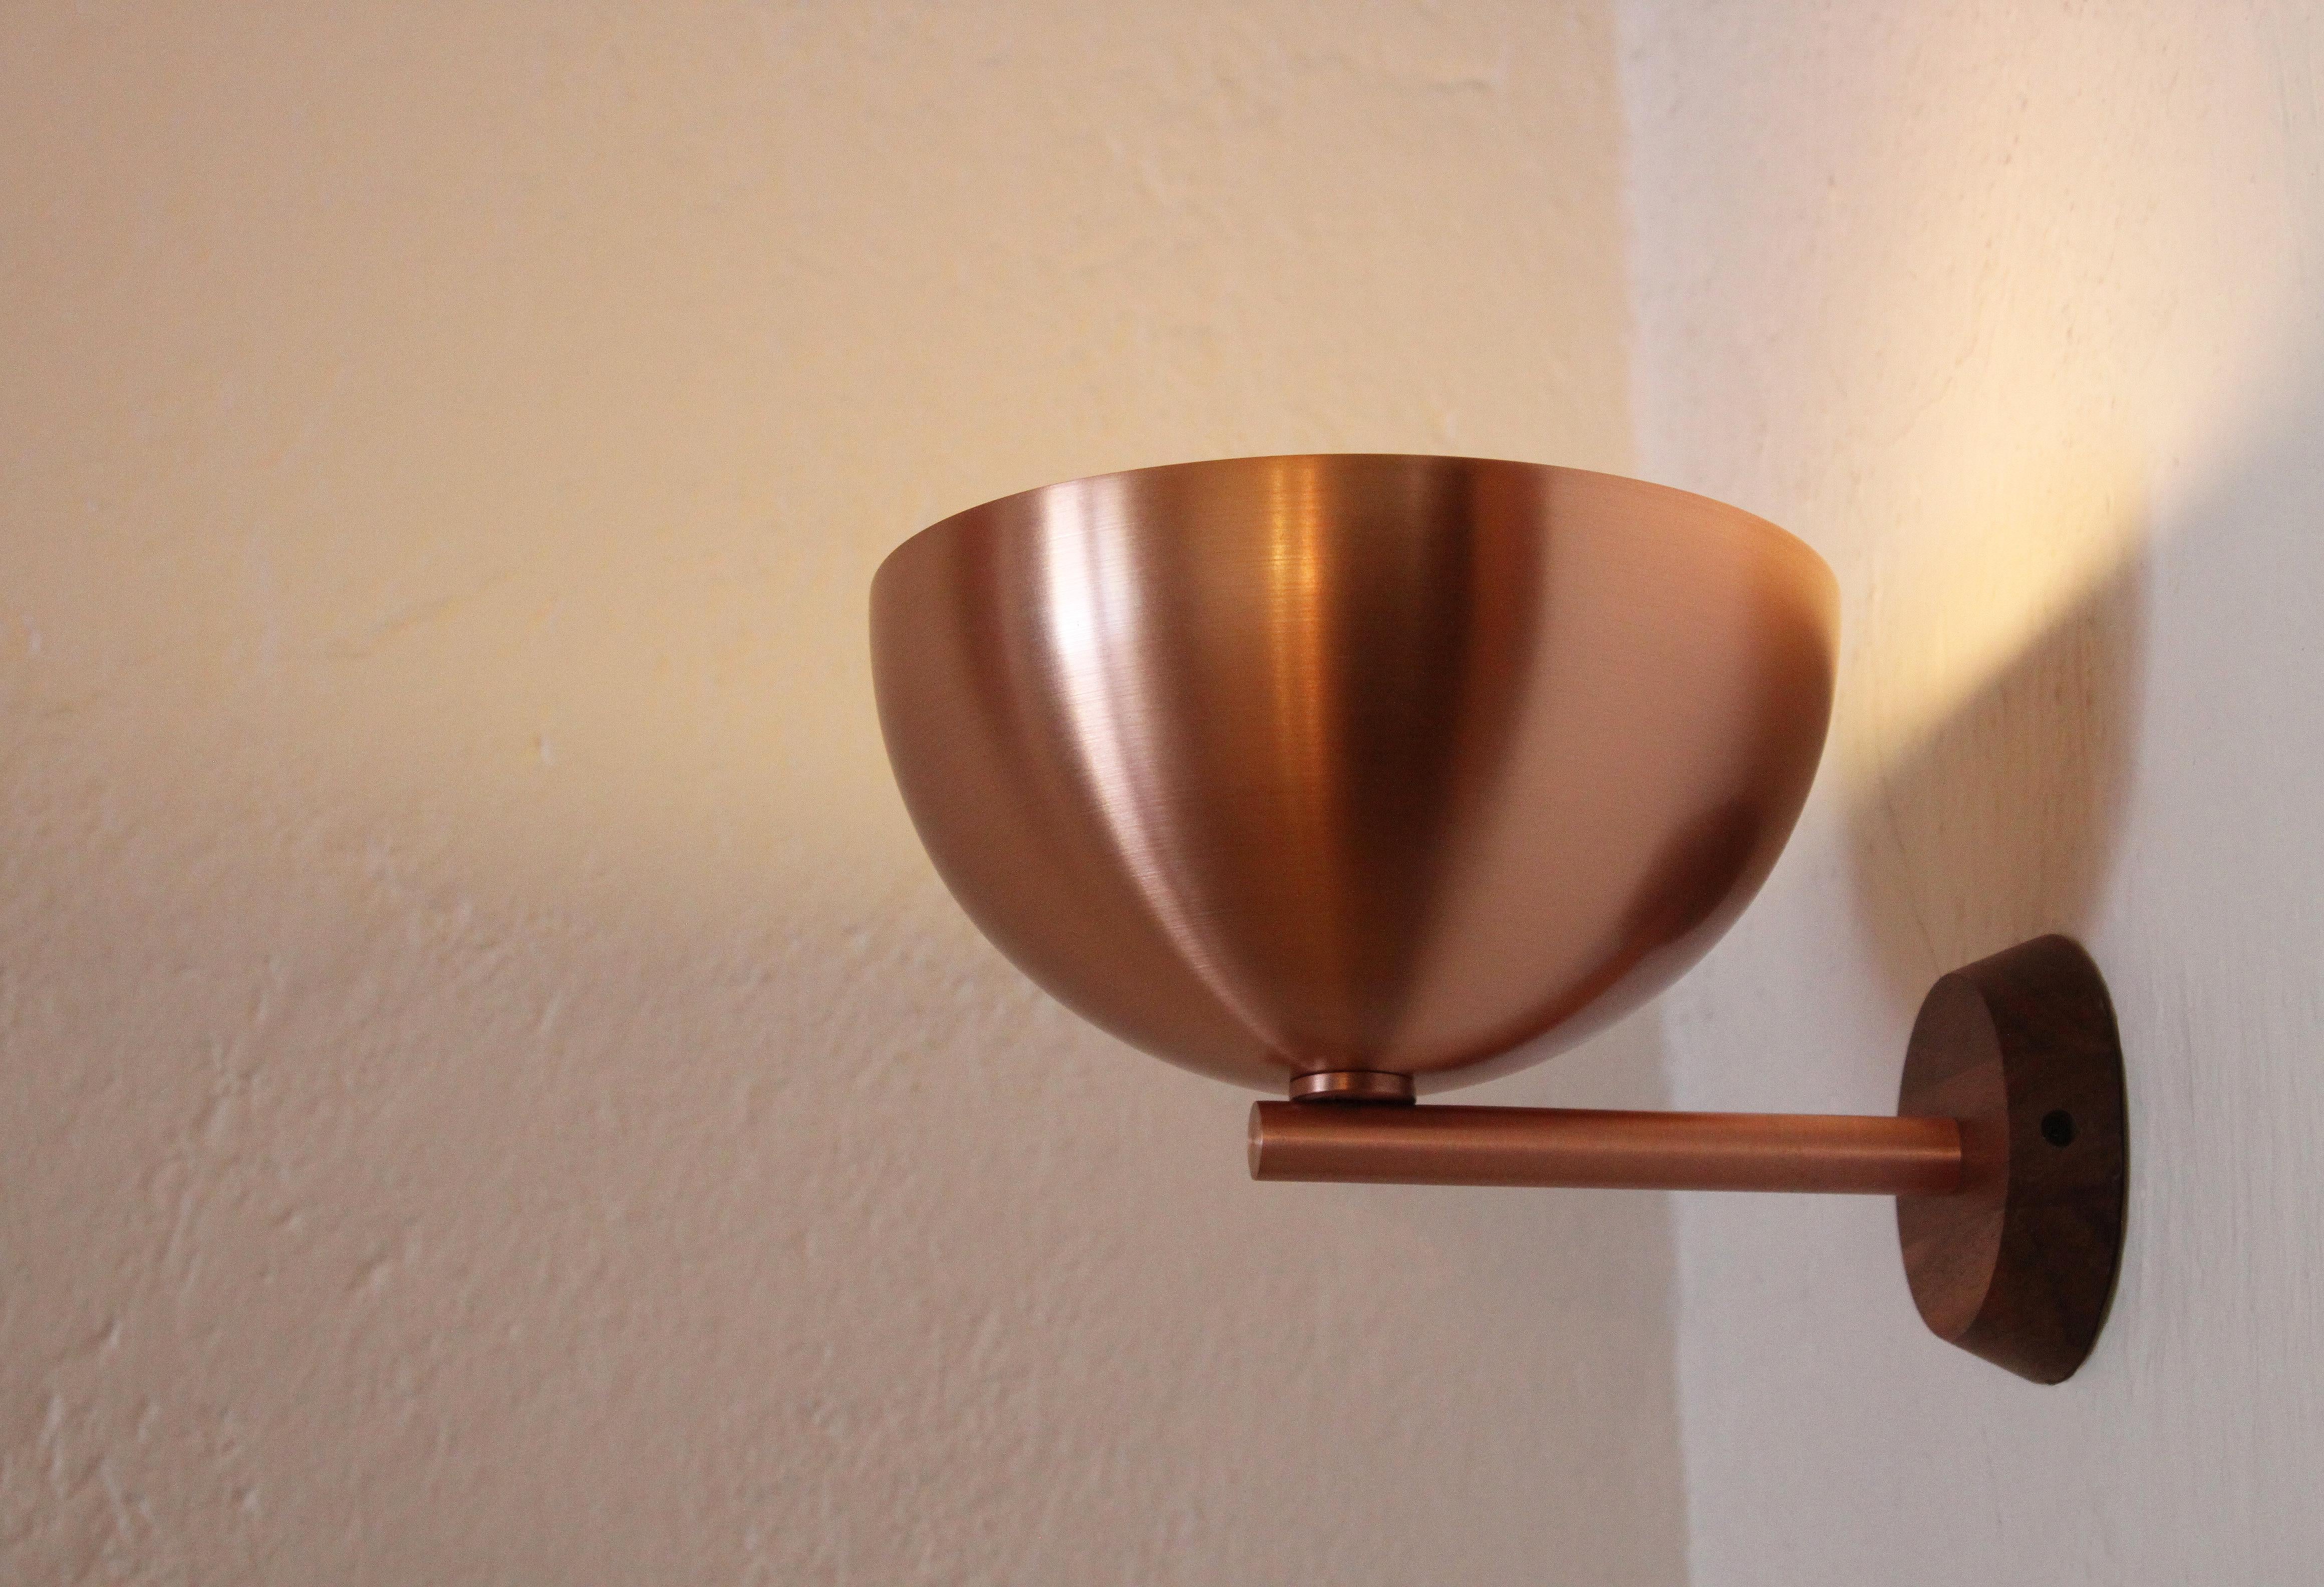 Copper Clasica A Muro Wall Sconce by Maria Beckmann, Represented by Tuleste Factory